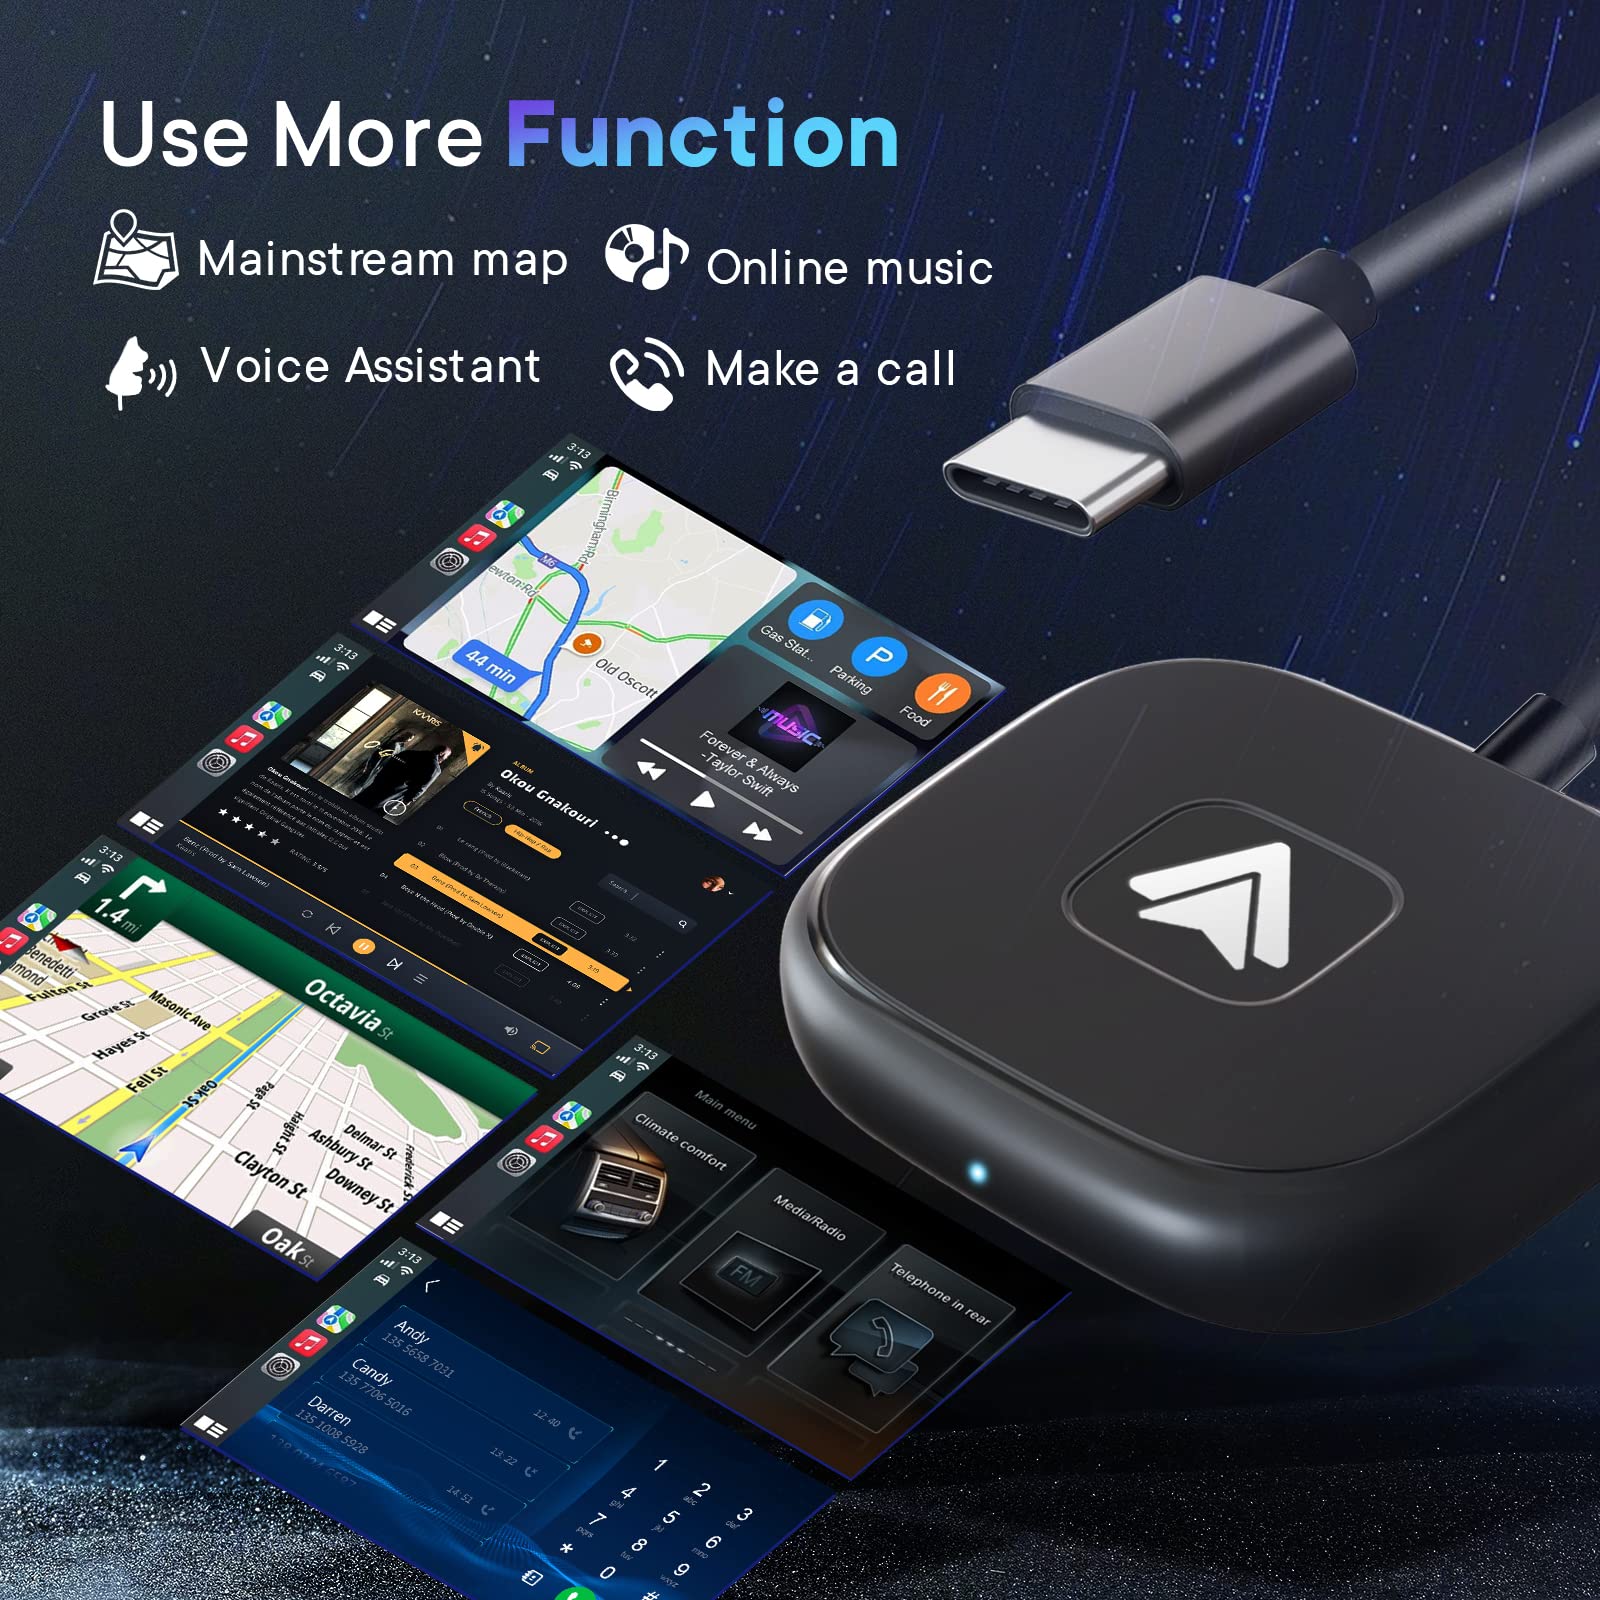 Kiuudre Android Auto Wireless Adapter for OEM Factory Wired Android Auto Cars, Plug and Play, Support USB and Type-C Interface,